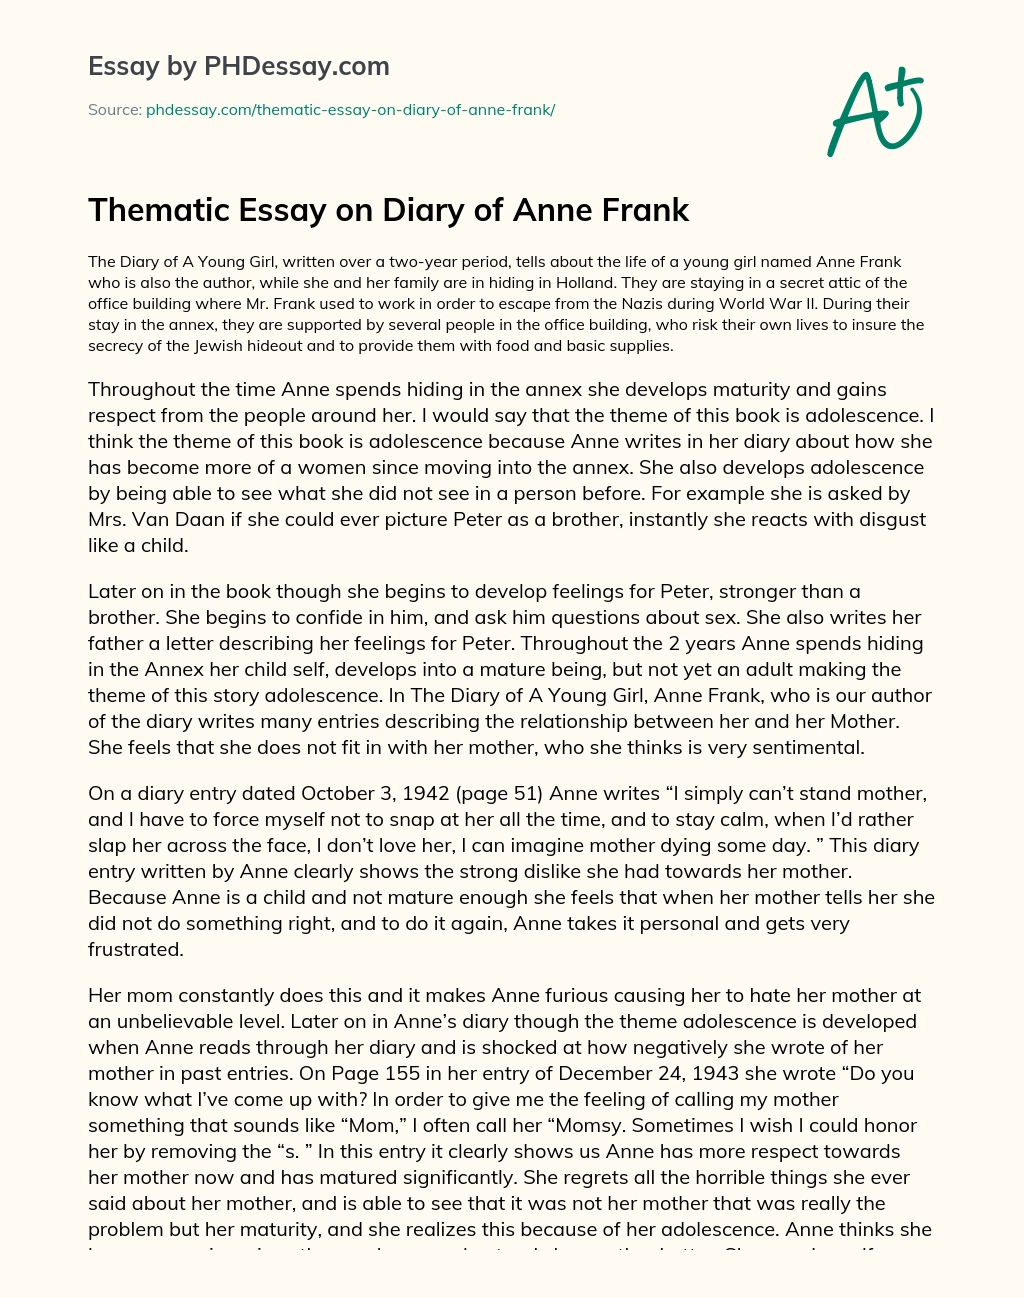 Thematic Essay on Diary of Anne Frank - PHDessay.com